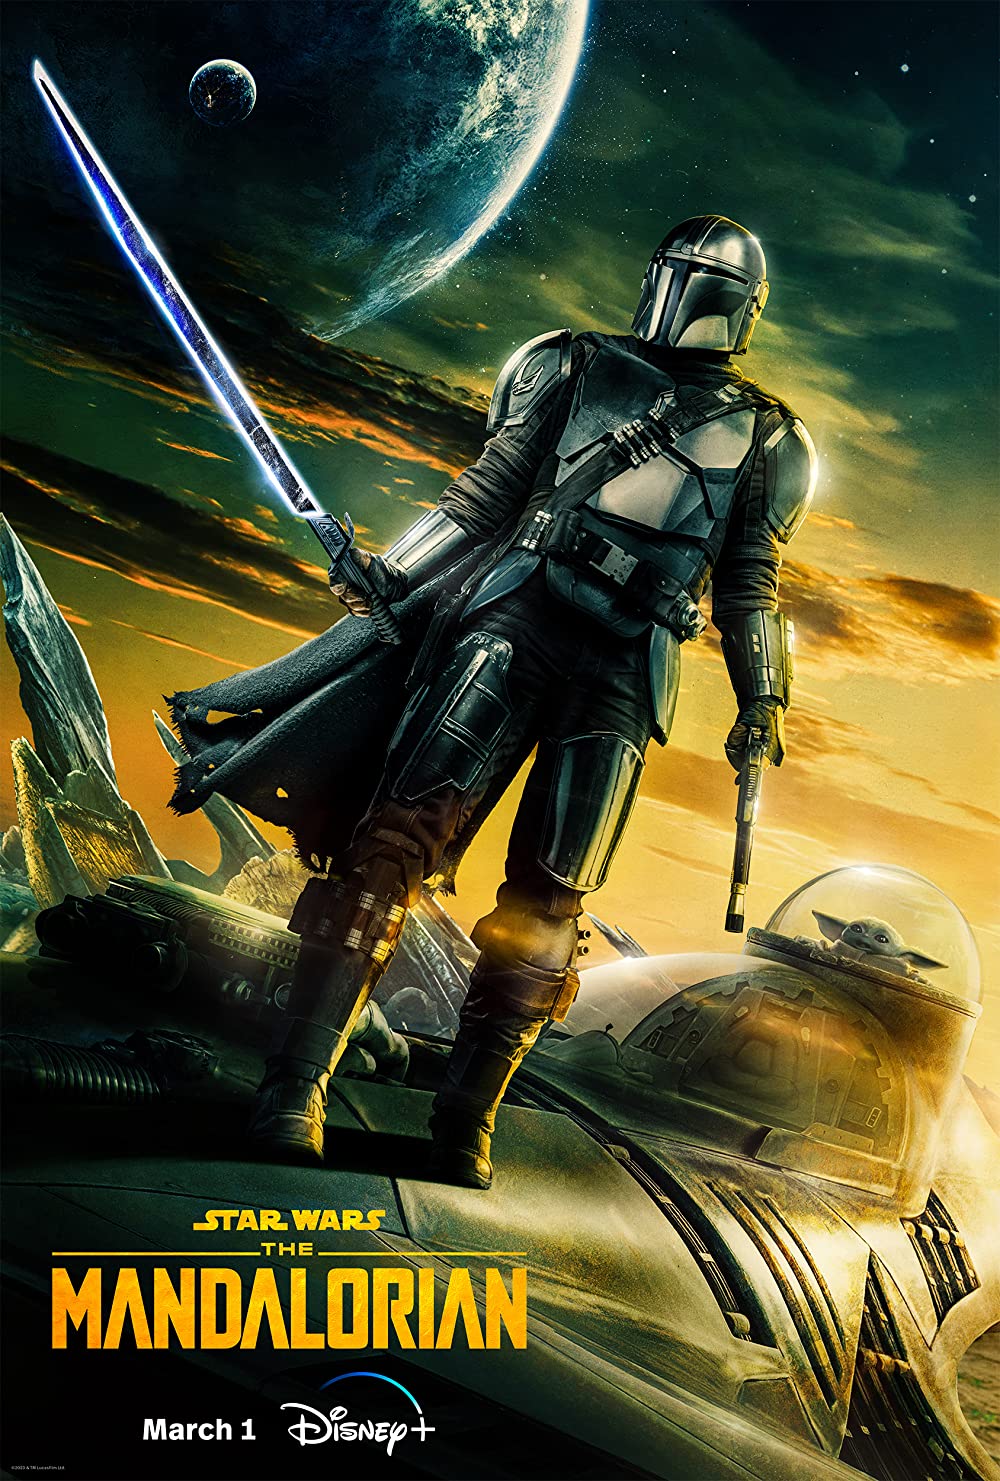 Download The Mandalorian S01 – Disney+ Hotstar (2019) Hindi ORG Dubbed Complete Web Series WEB DL 1080p [3.2GB] | 720p [1.8GB] | 480p [900MB] download